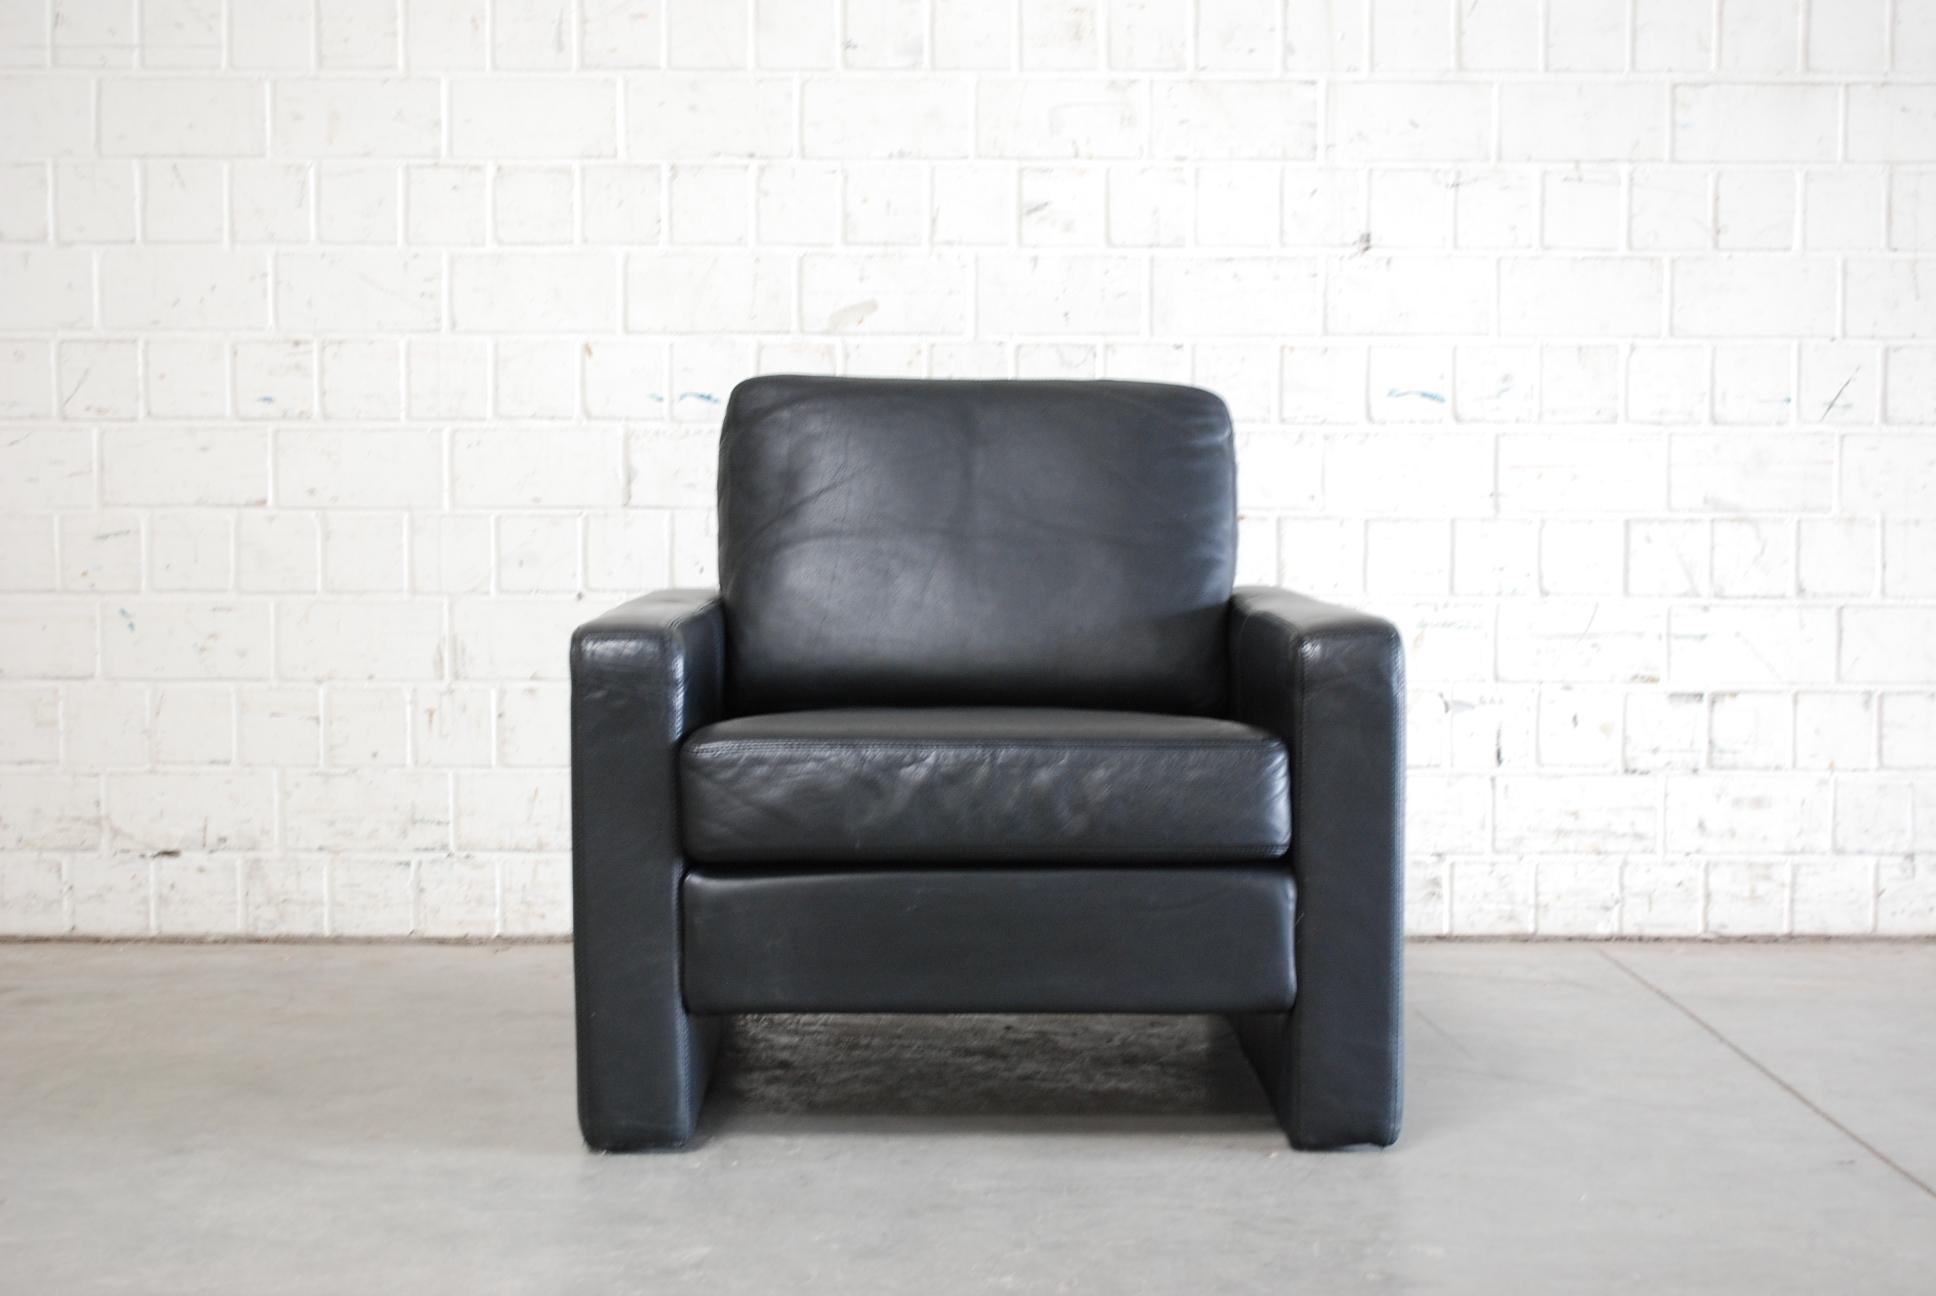 COR pair of leather model Conseta
Back aniline leather.
Comfortable armchair with decent design.
Design by Friedrich Wilhelm Möller
A German masterpiece of functional design.

   